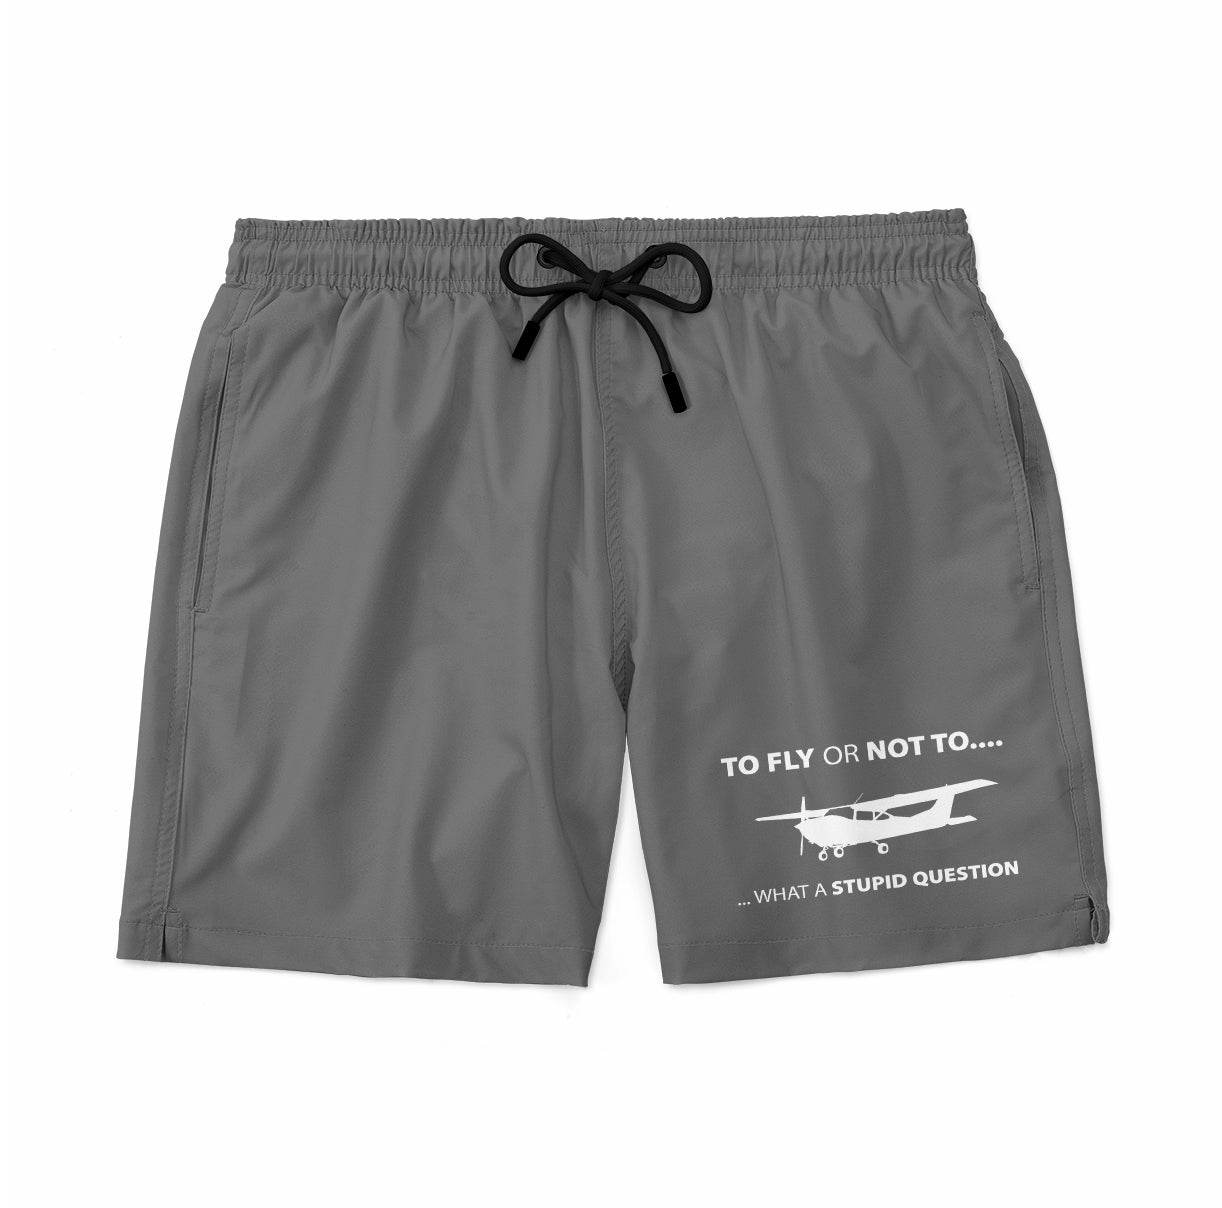 To Fly or Not To What a Stupid Question Designed Swim Trunks & Shorts